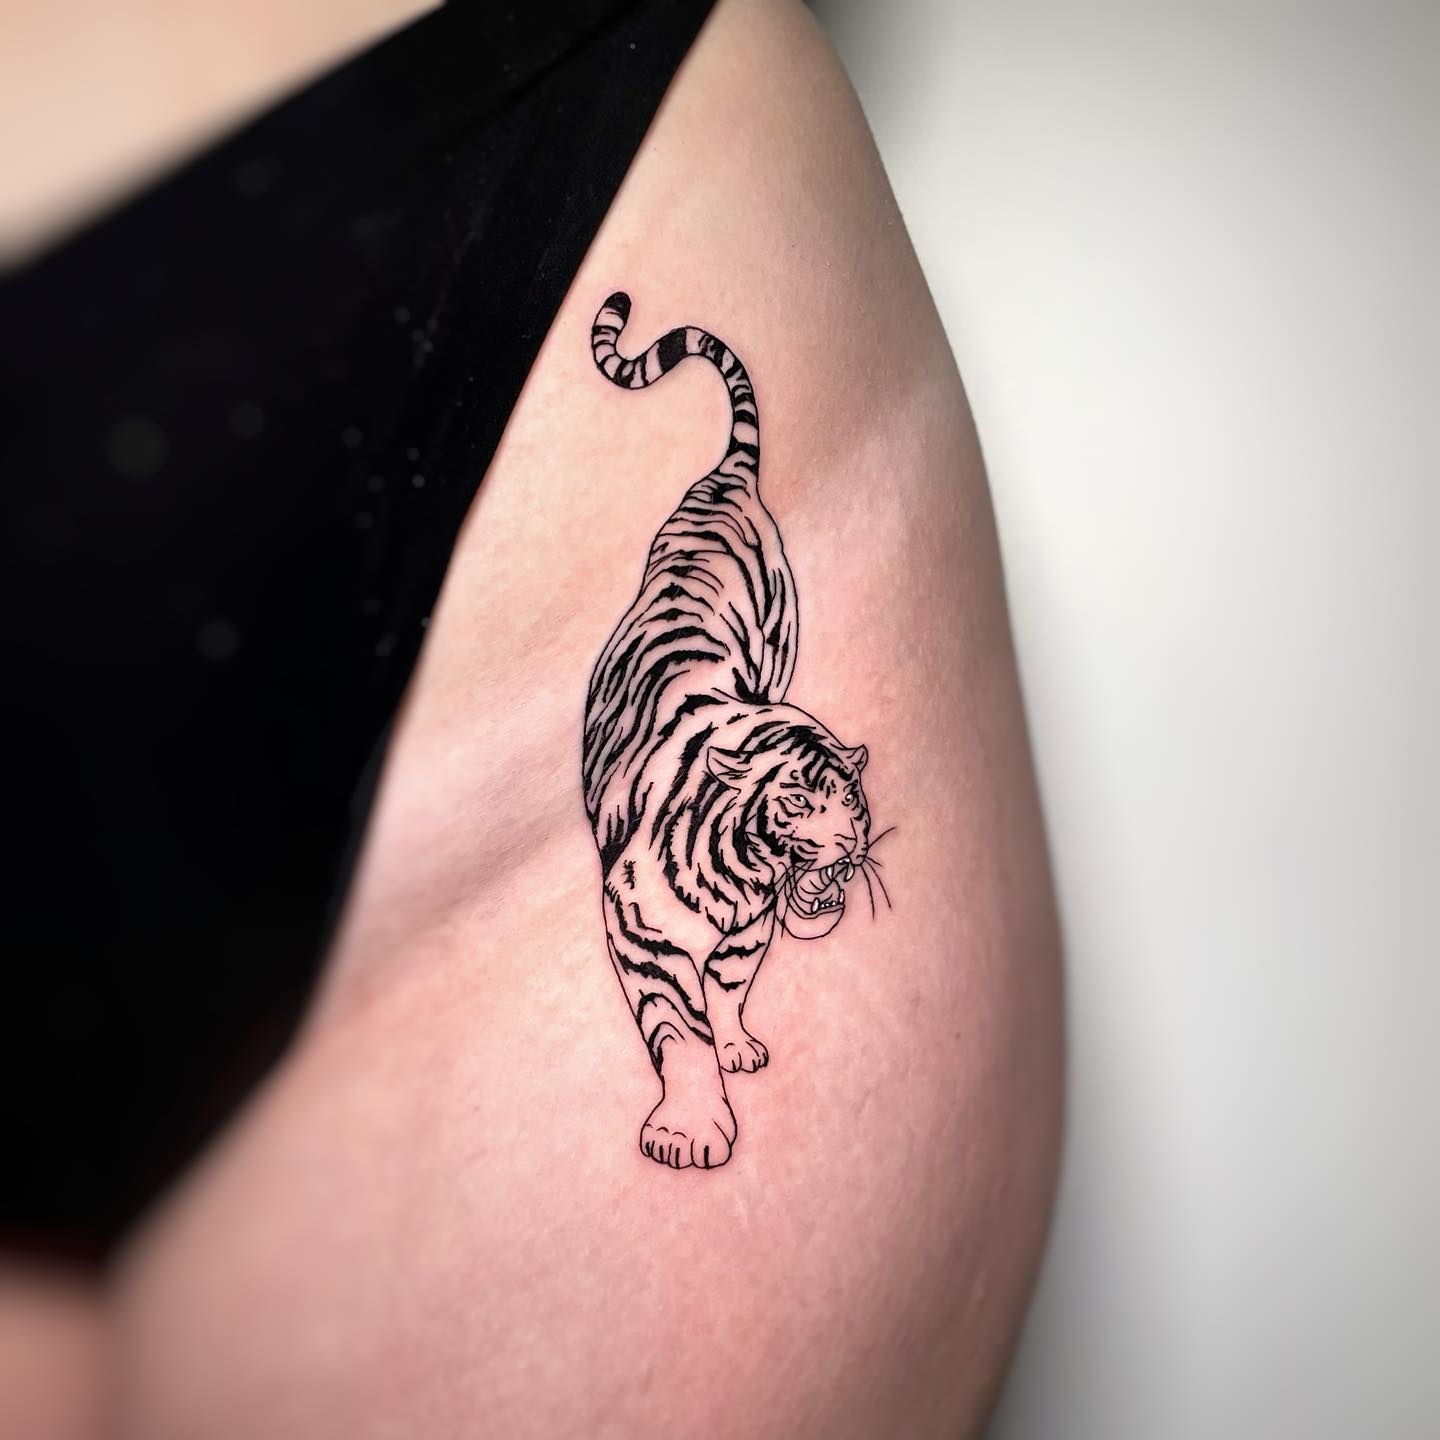 If there’s a tiger within you and you’re a fierce girl who likes attention, this tattoo is for you. Show that you know how to attract both looks and attention with this stylish yet feline-feisty design.